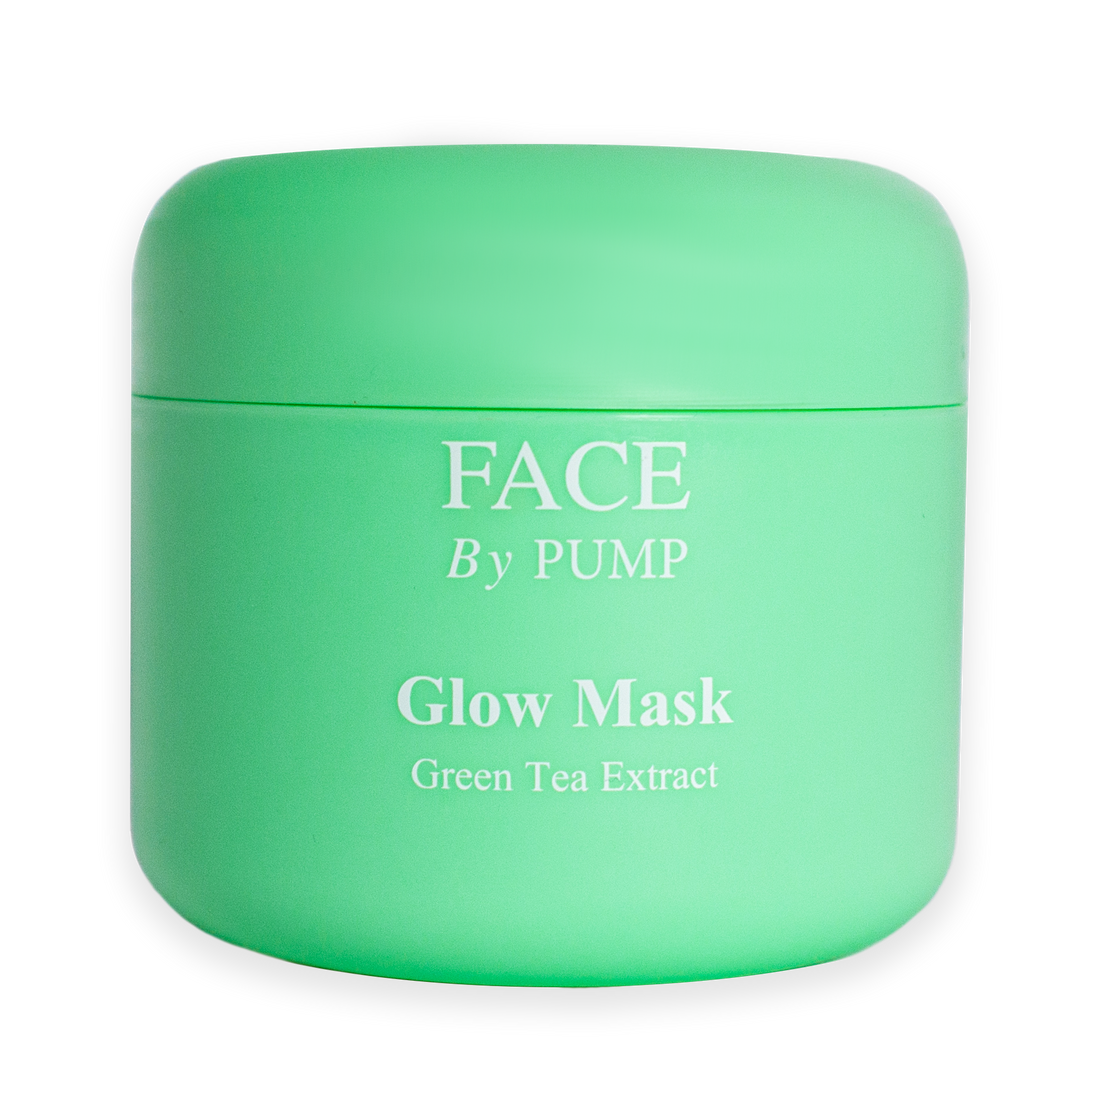 FACE By PUMP Glow Mask